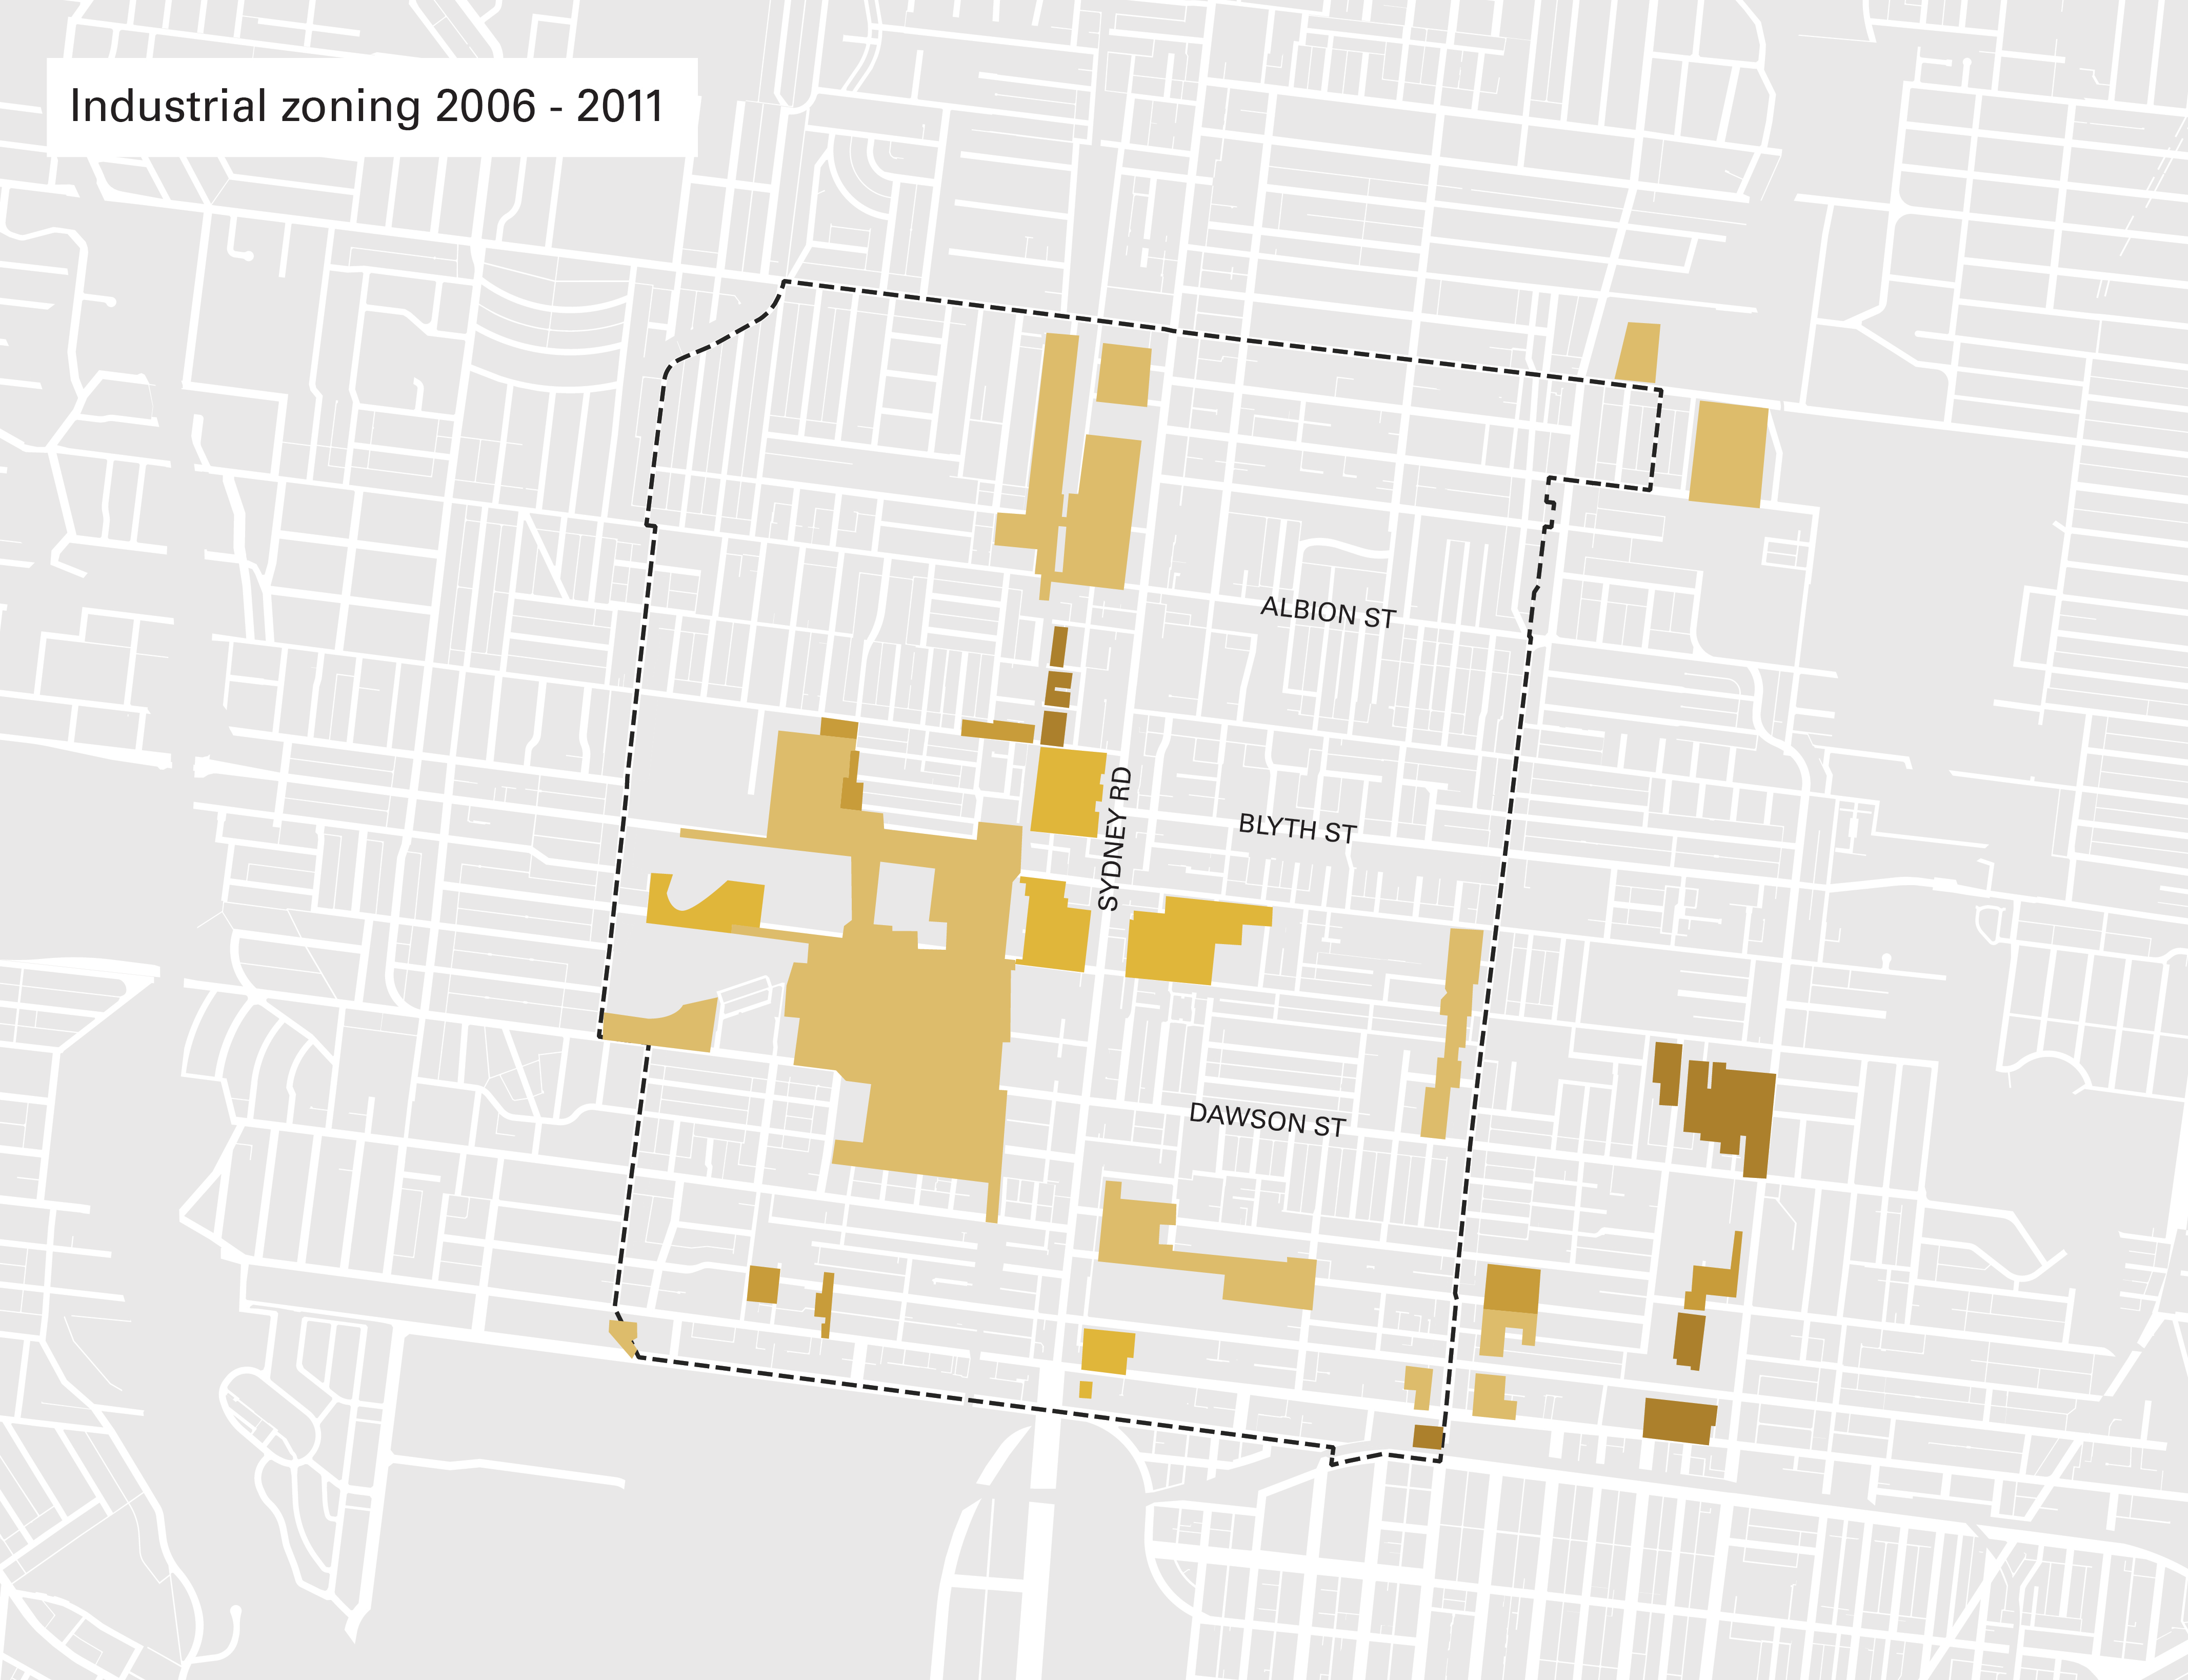 Birds-eye view of a greyscale map of Brunswick with highlighted industrial zoned areas decreasing over time.